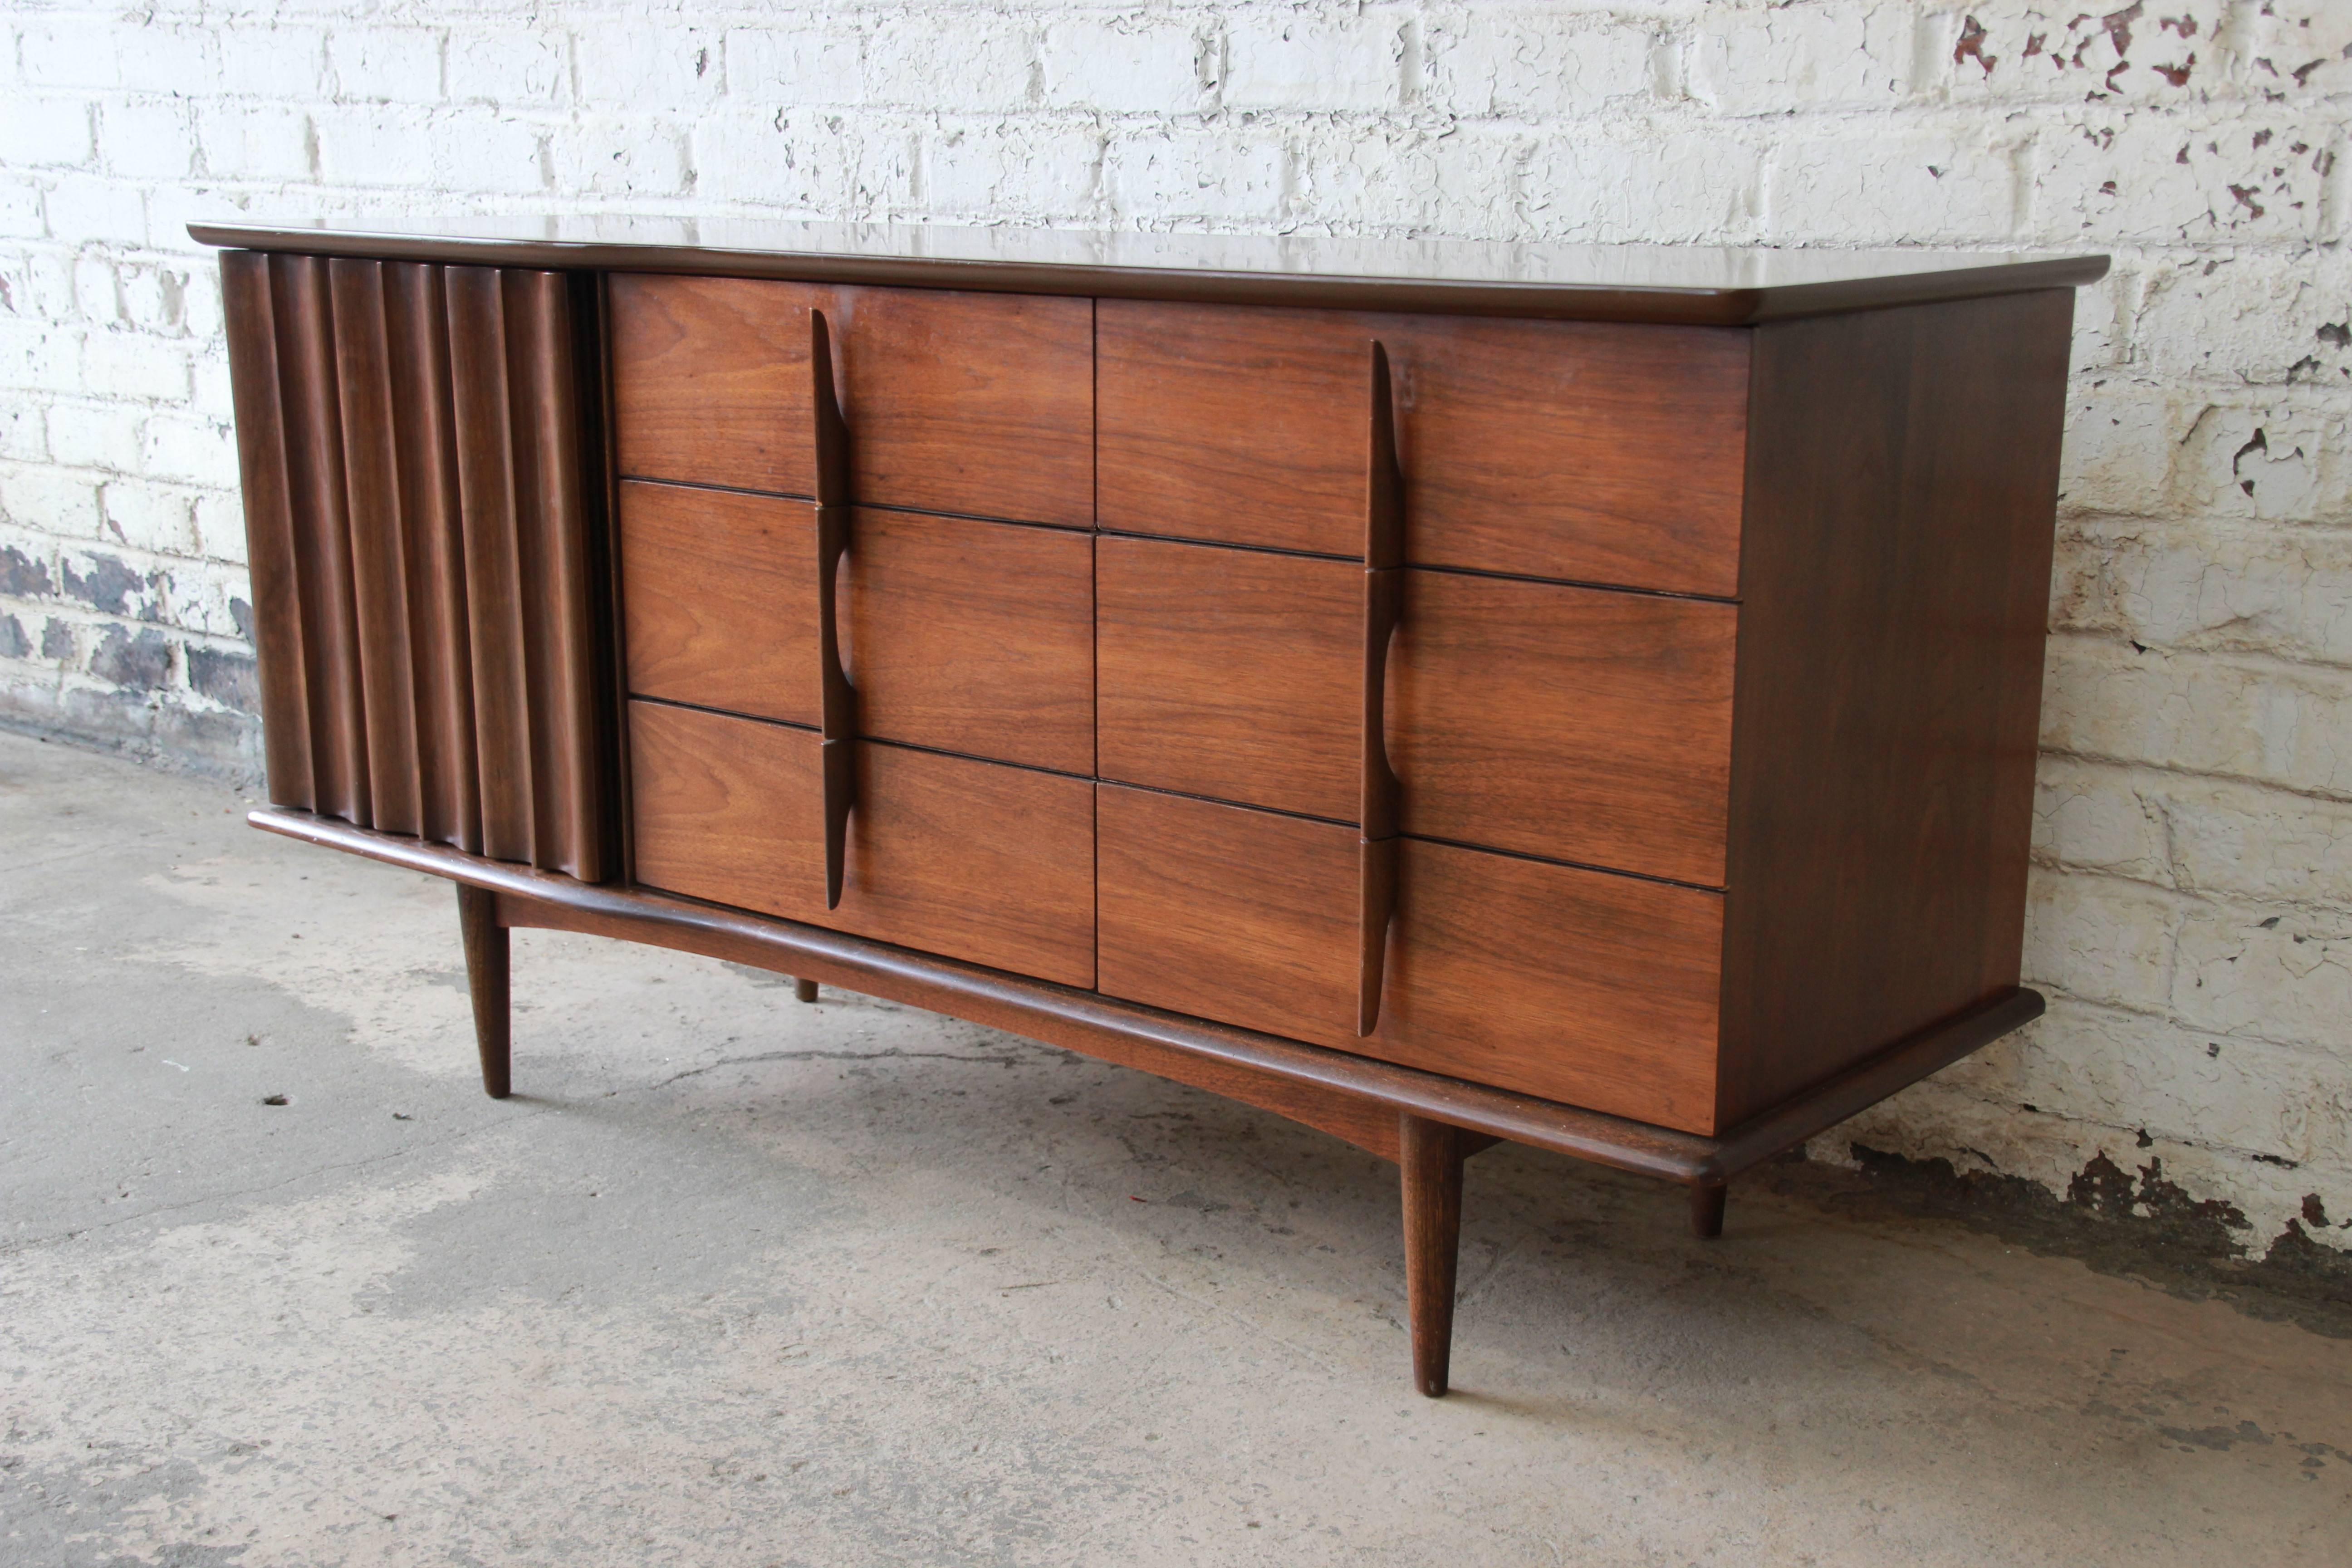 A stylish Mid-Century Modern sculpted walnut triple dresser or credenza by United Furniture Co. The dresser features gorgeous walnut wood grain and sleek Mid-Century Modern design. It offers ample room for storage, with nine dovetailed drawers. The